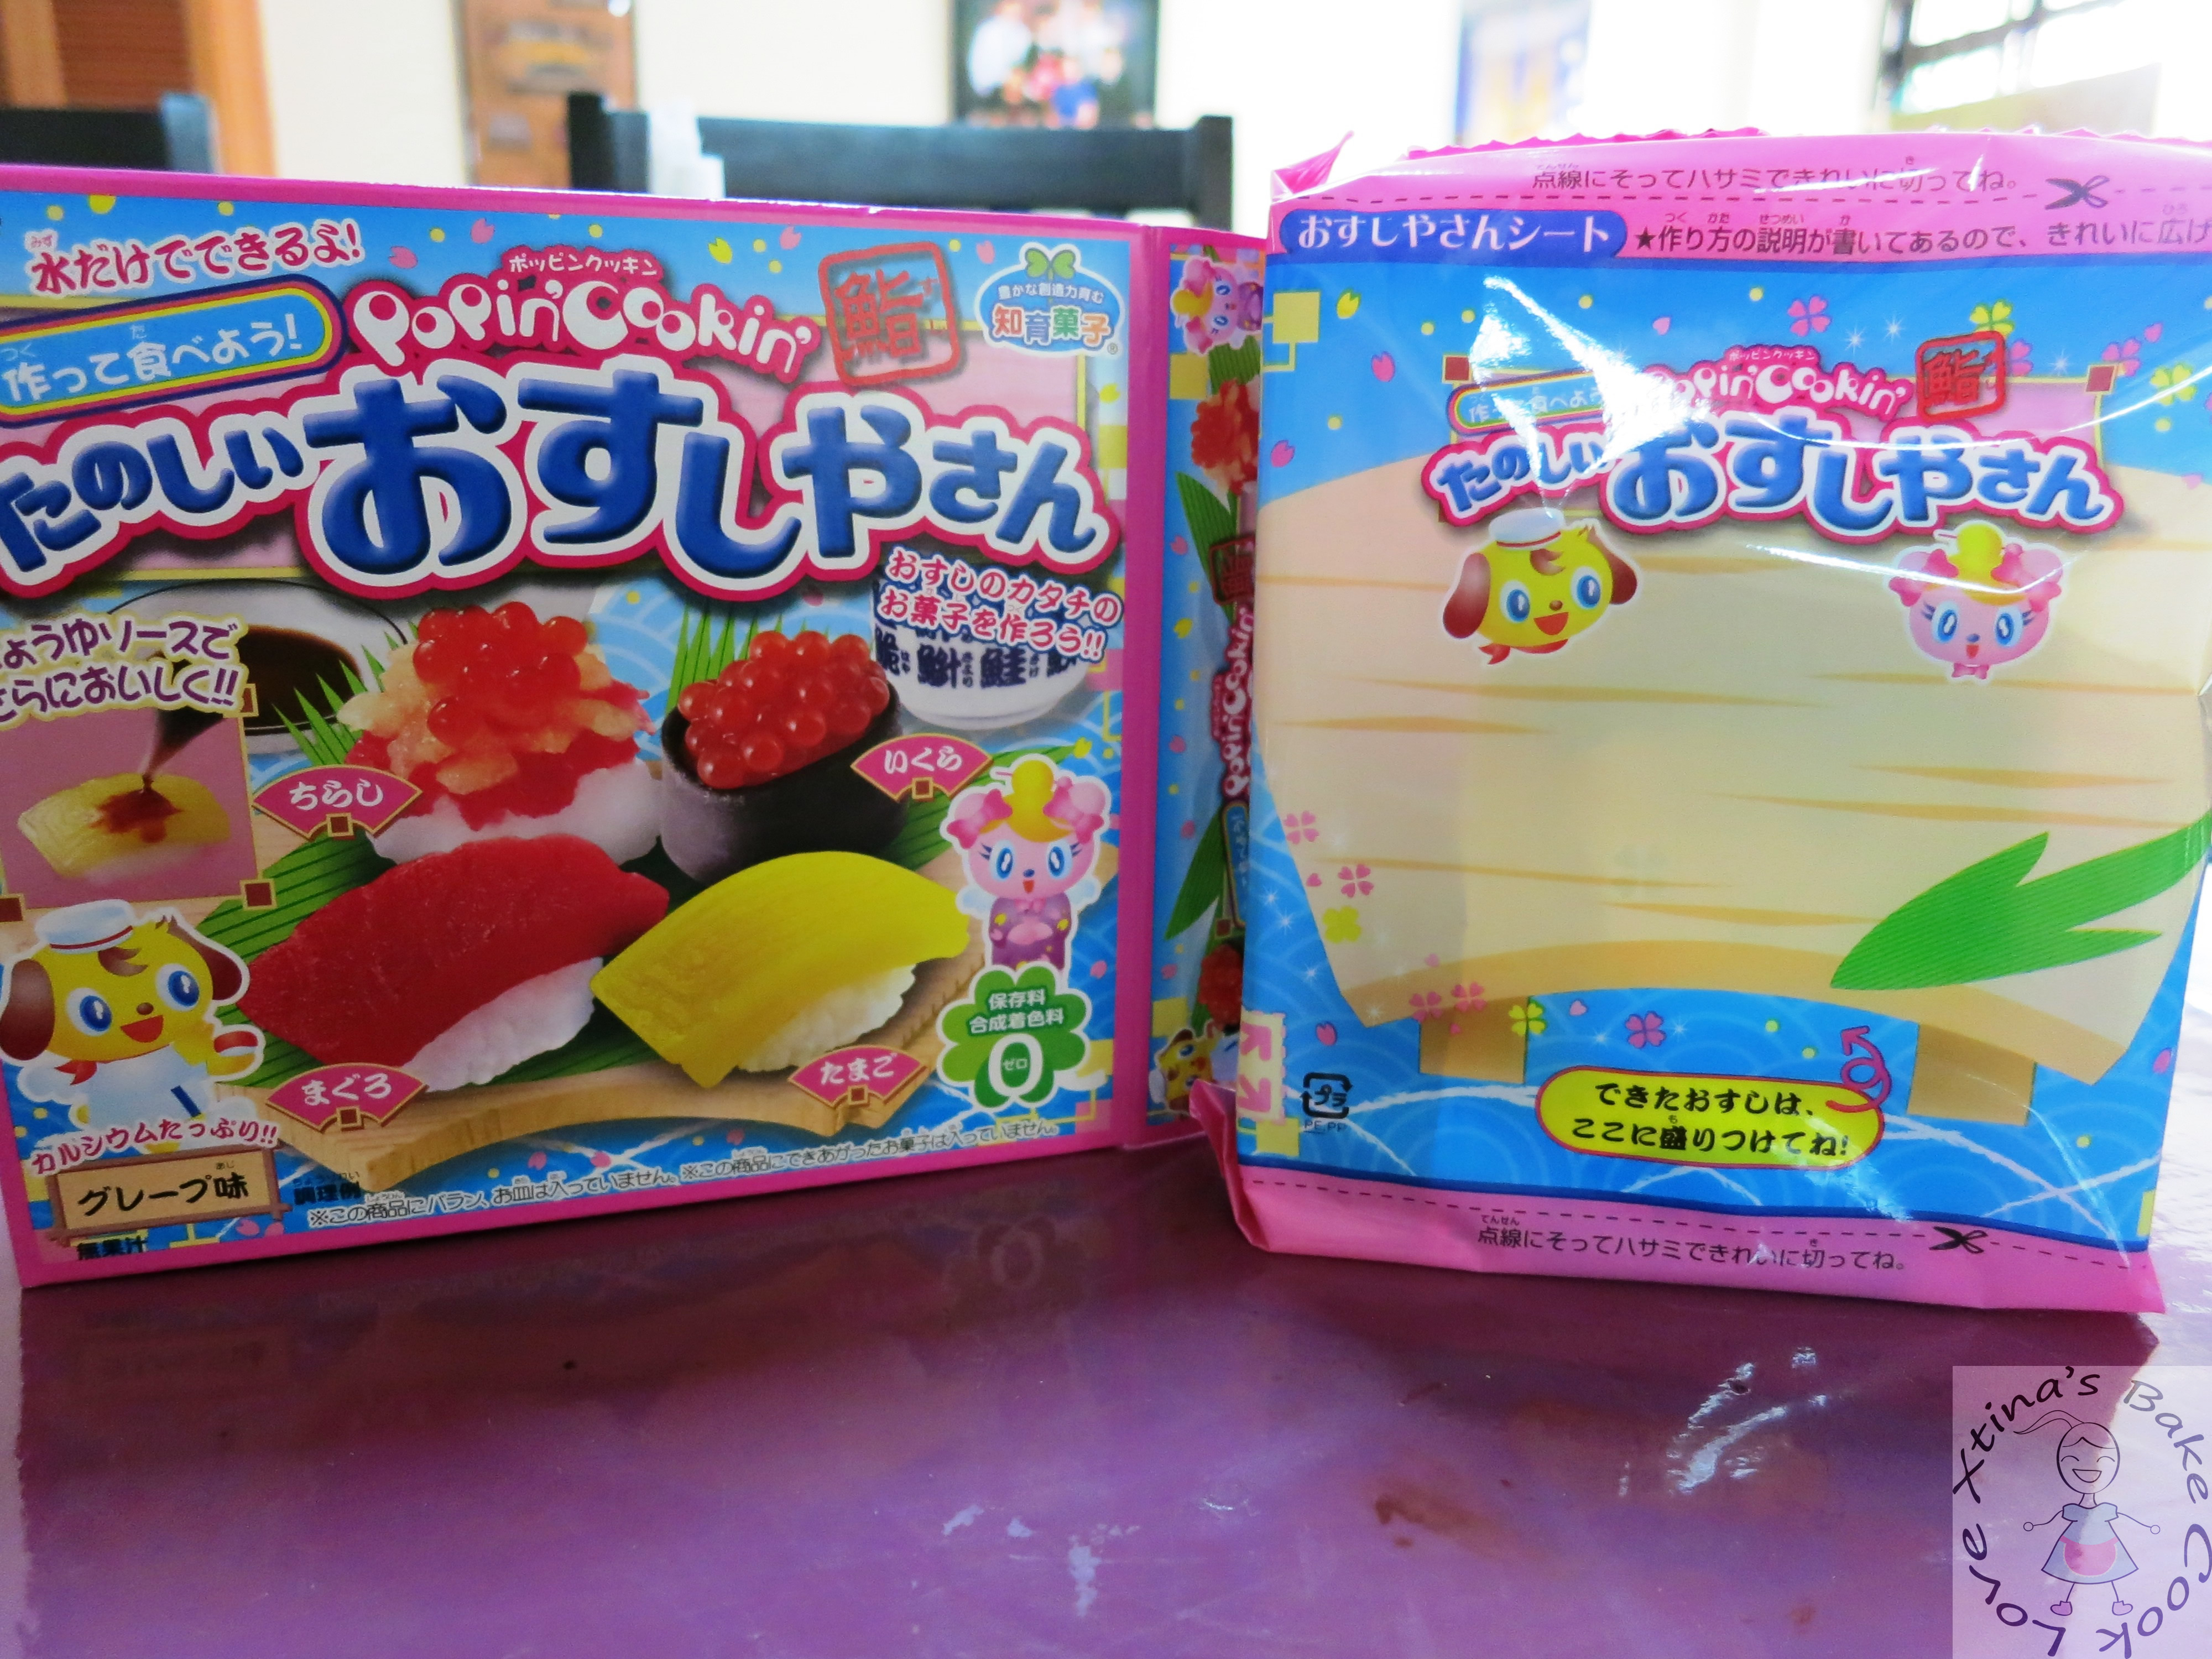 Popin' Cookin' Happy Sushi House Candy Making Set